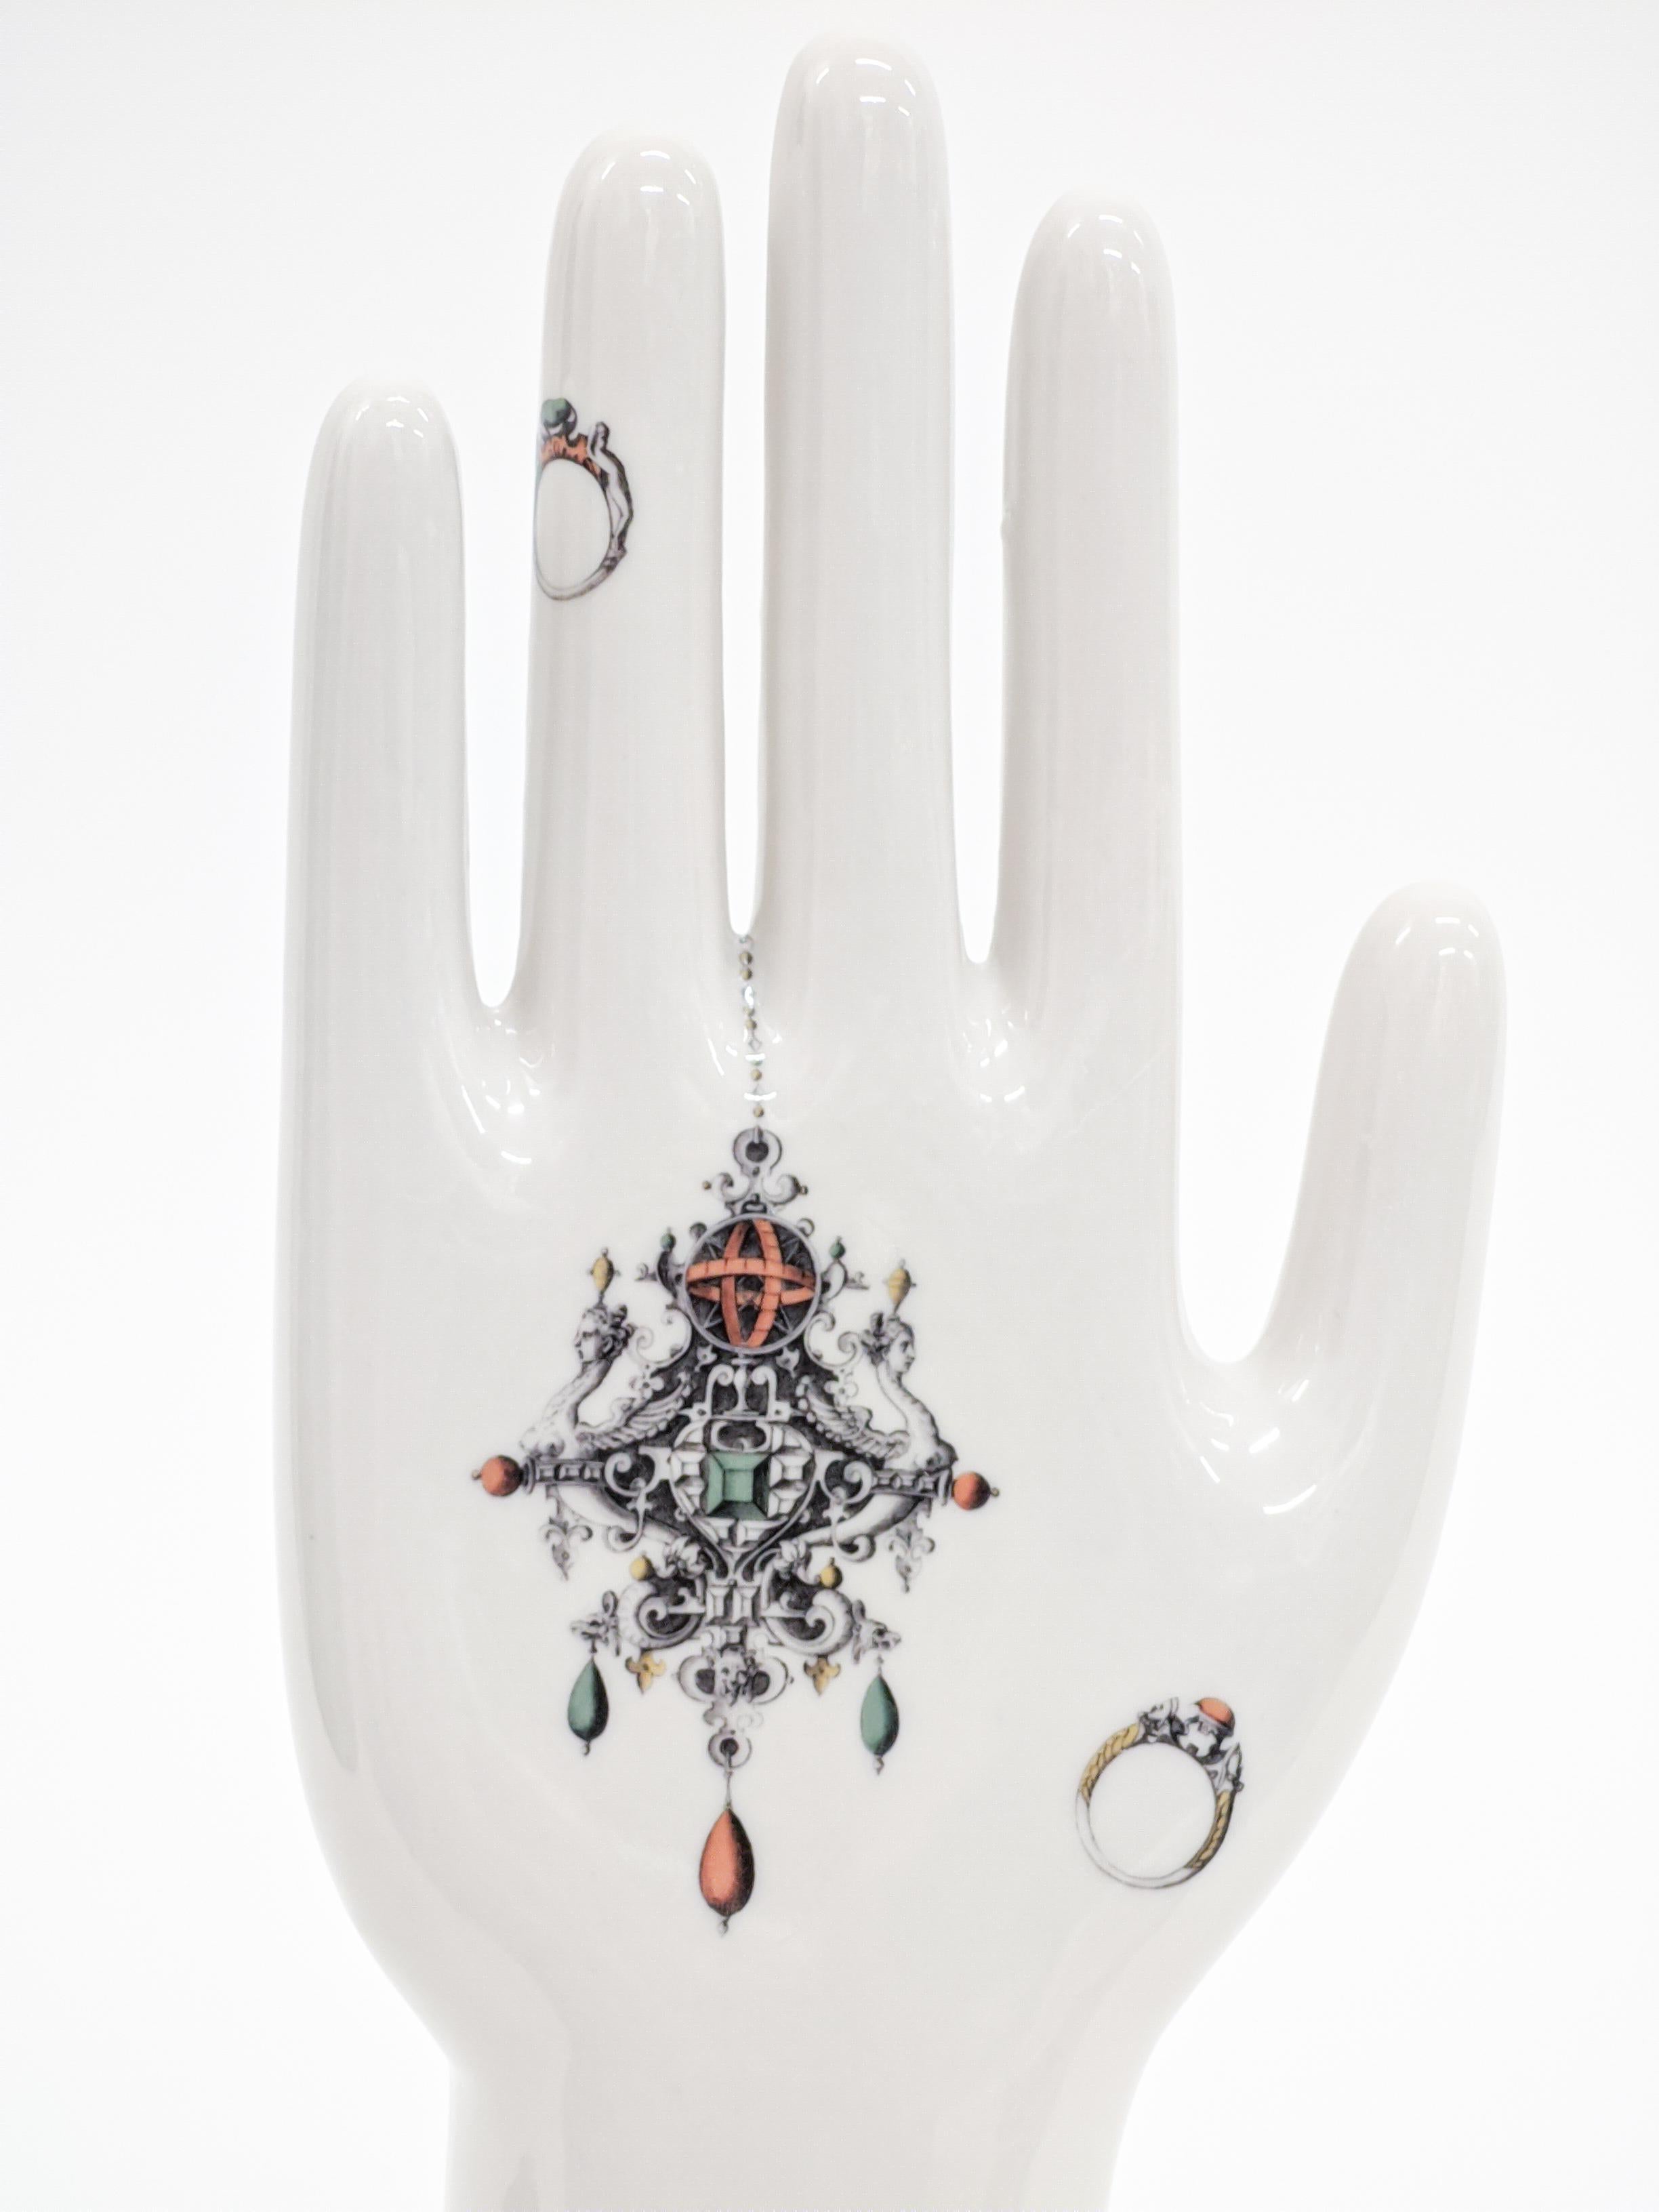 Italian Anatomica, Porcelain Hand with Jewels Decoration by Vito Nesta For Sale